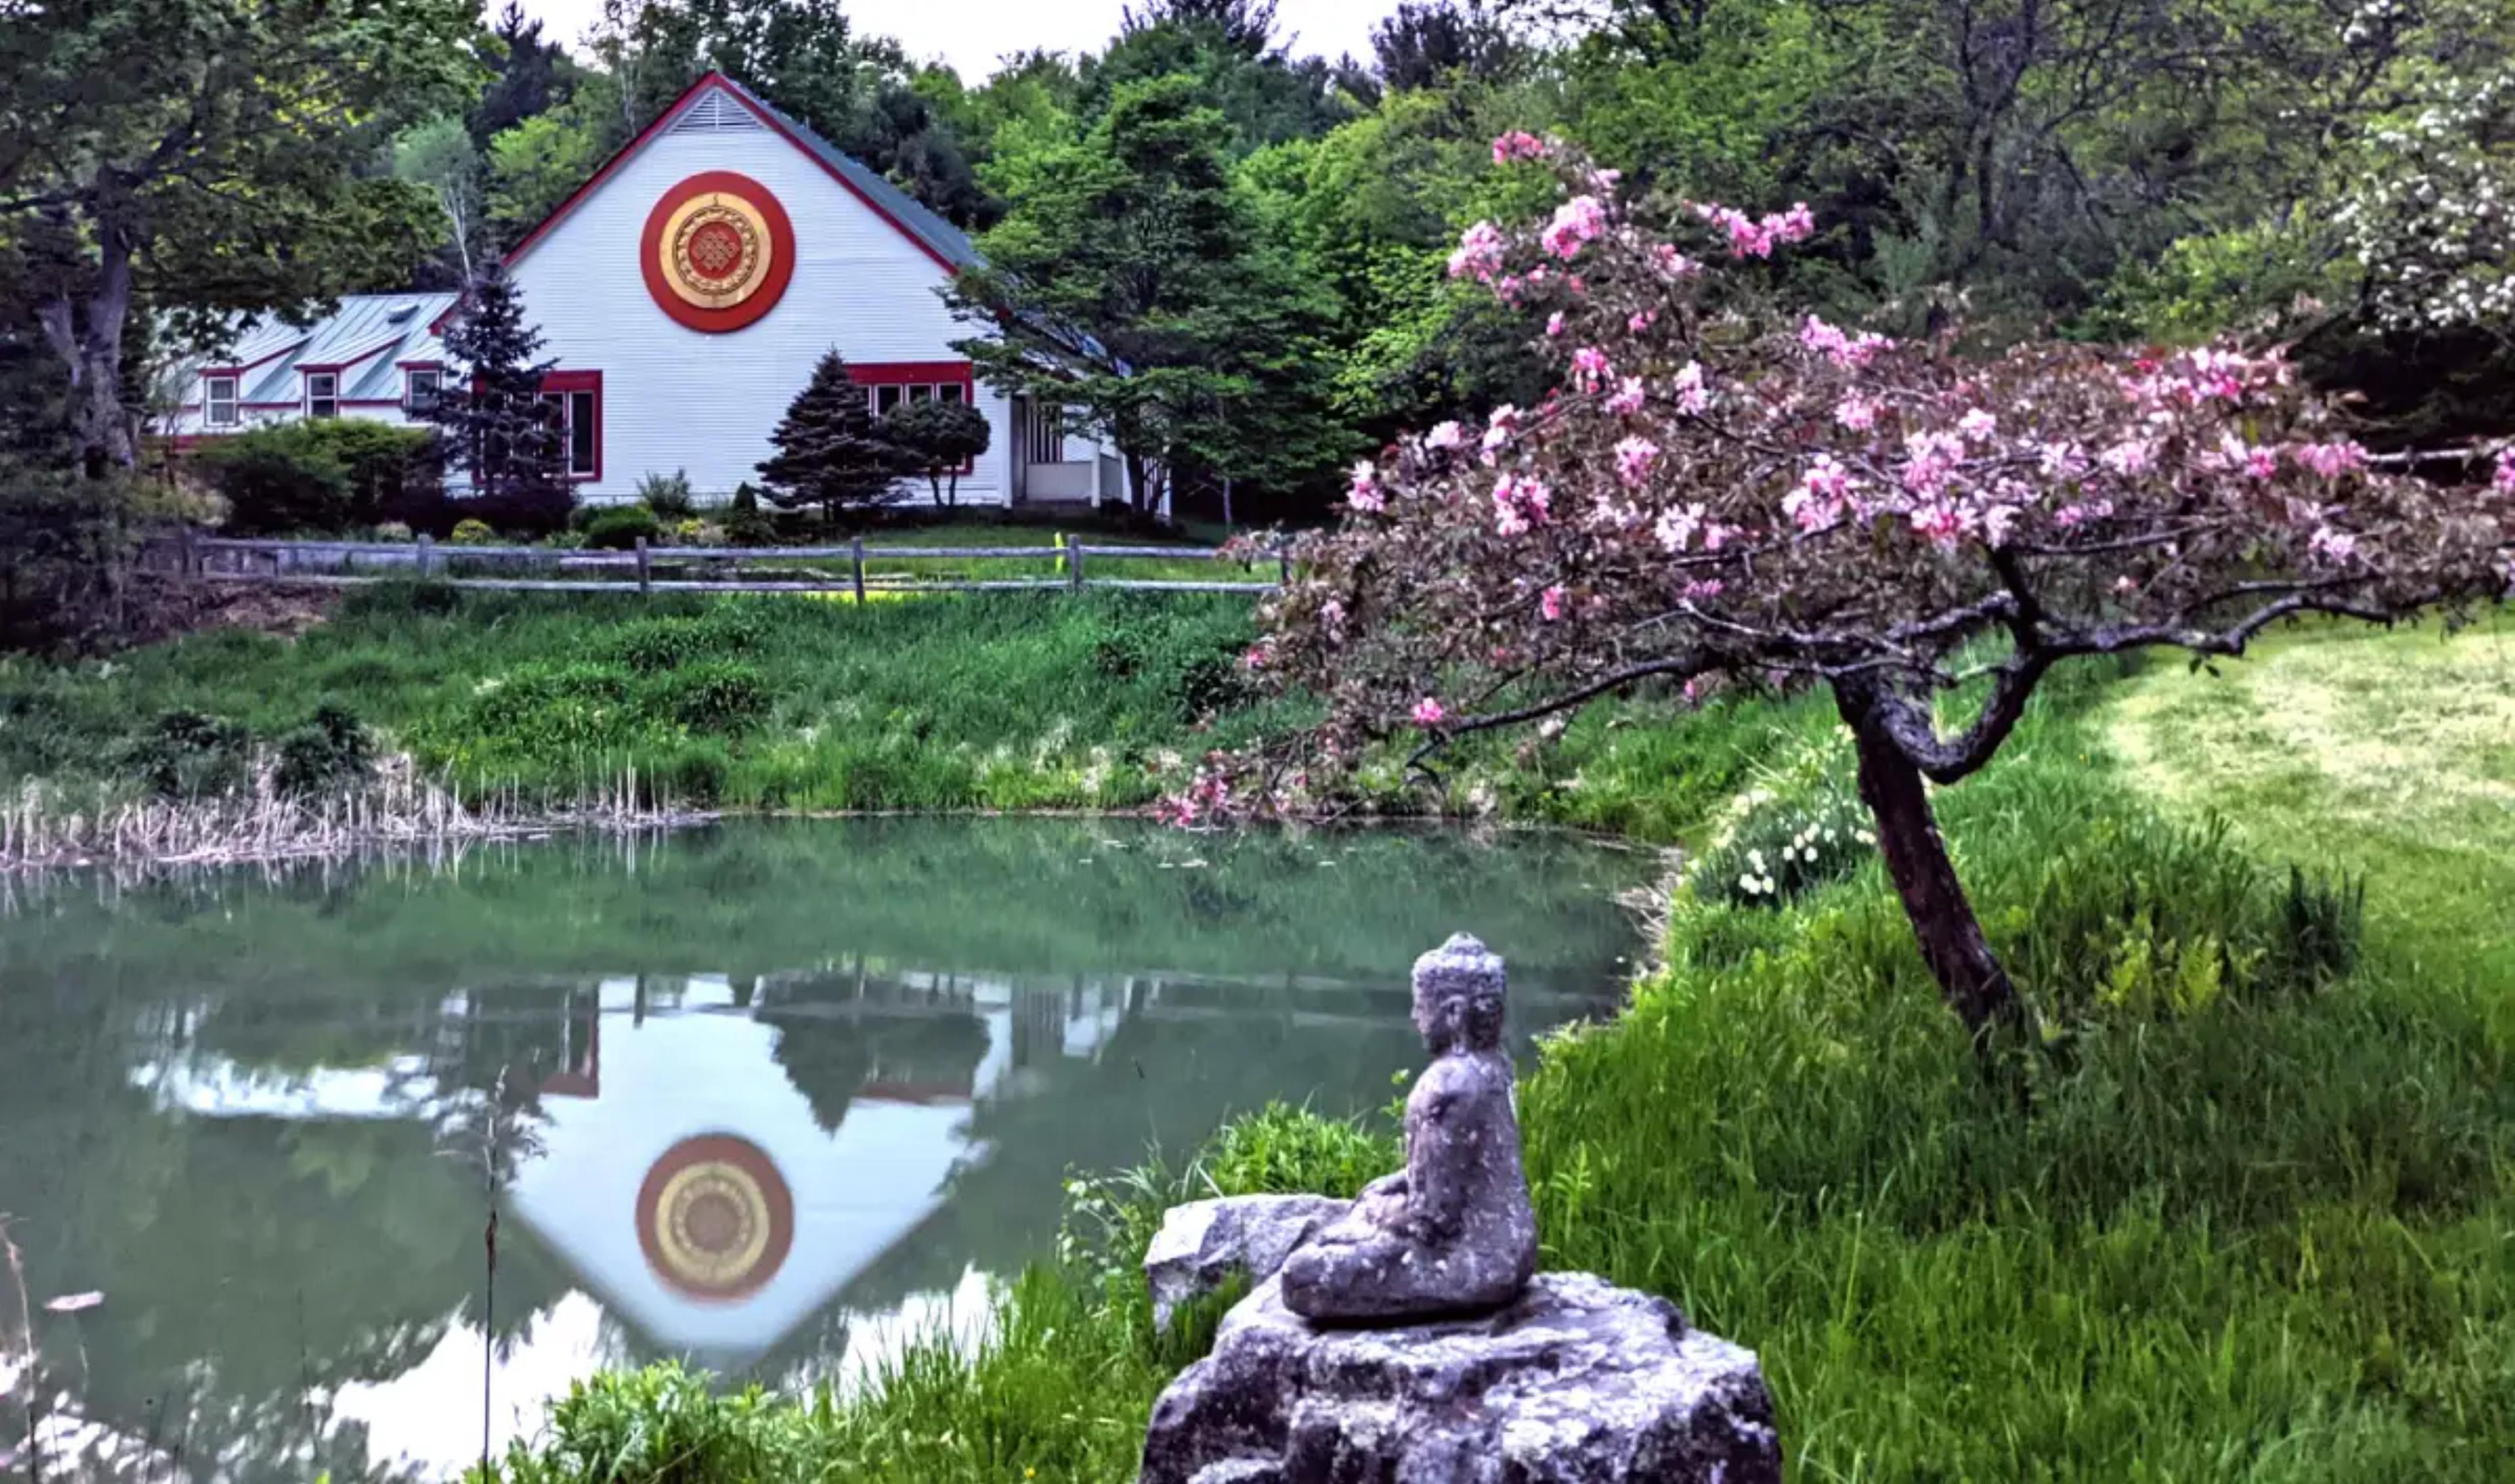 Come visit us at Karme Choling meditation retreat center in the Green Mountains of Vermont.